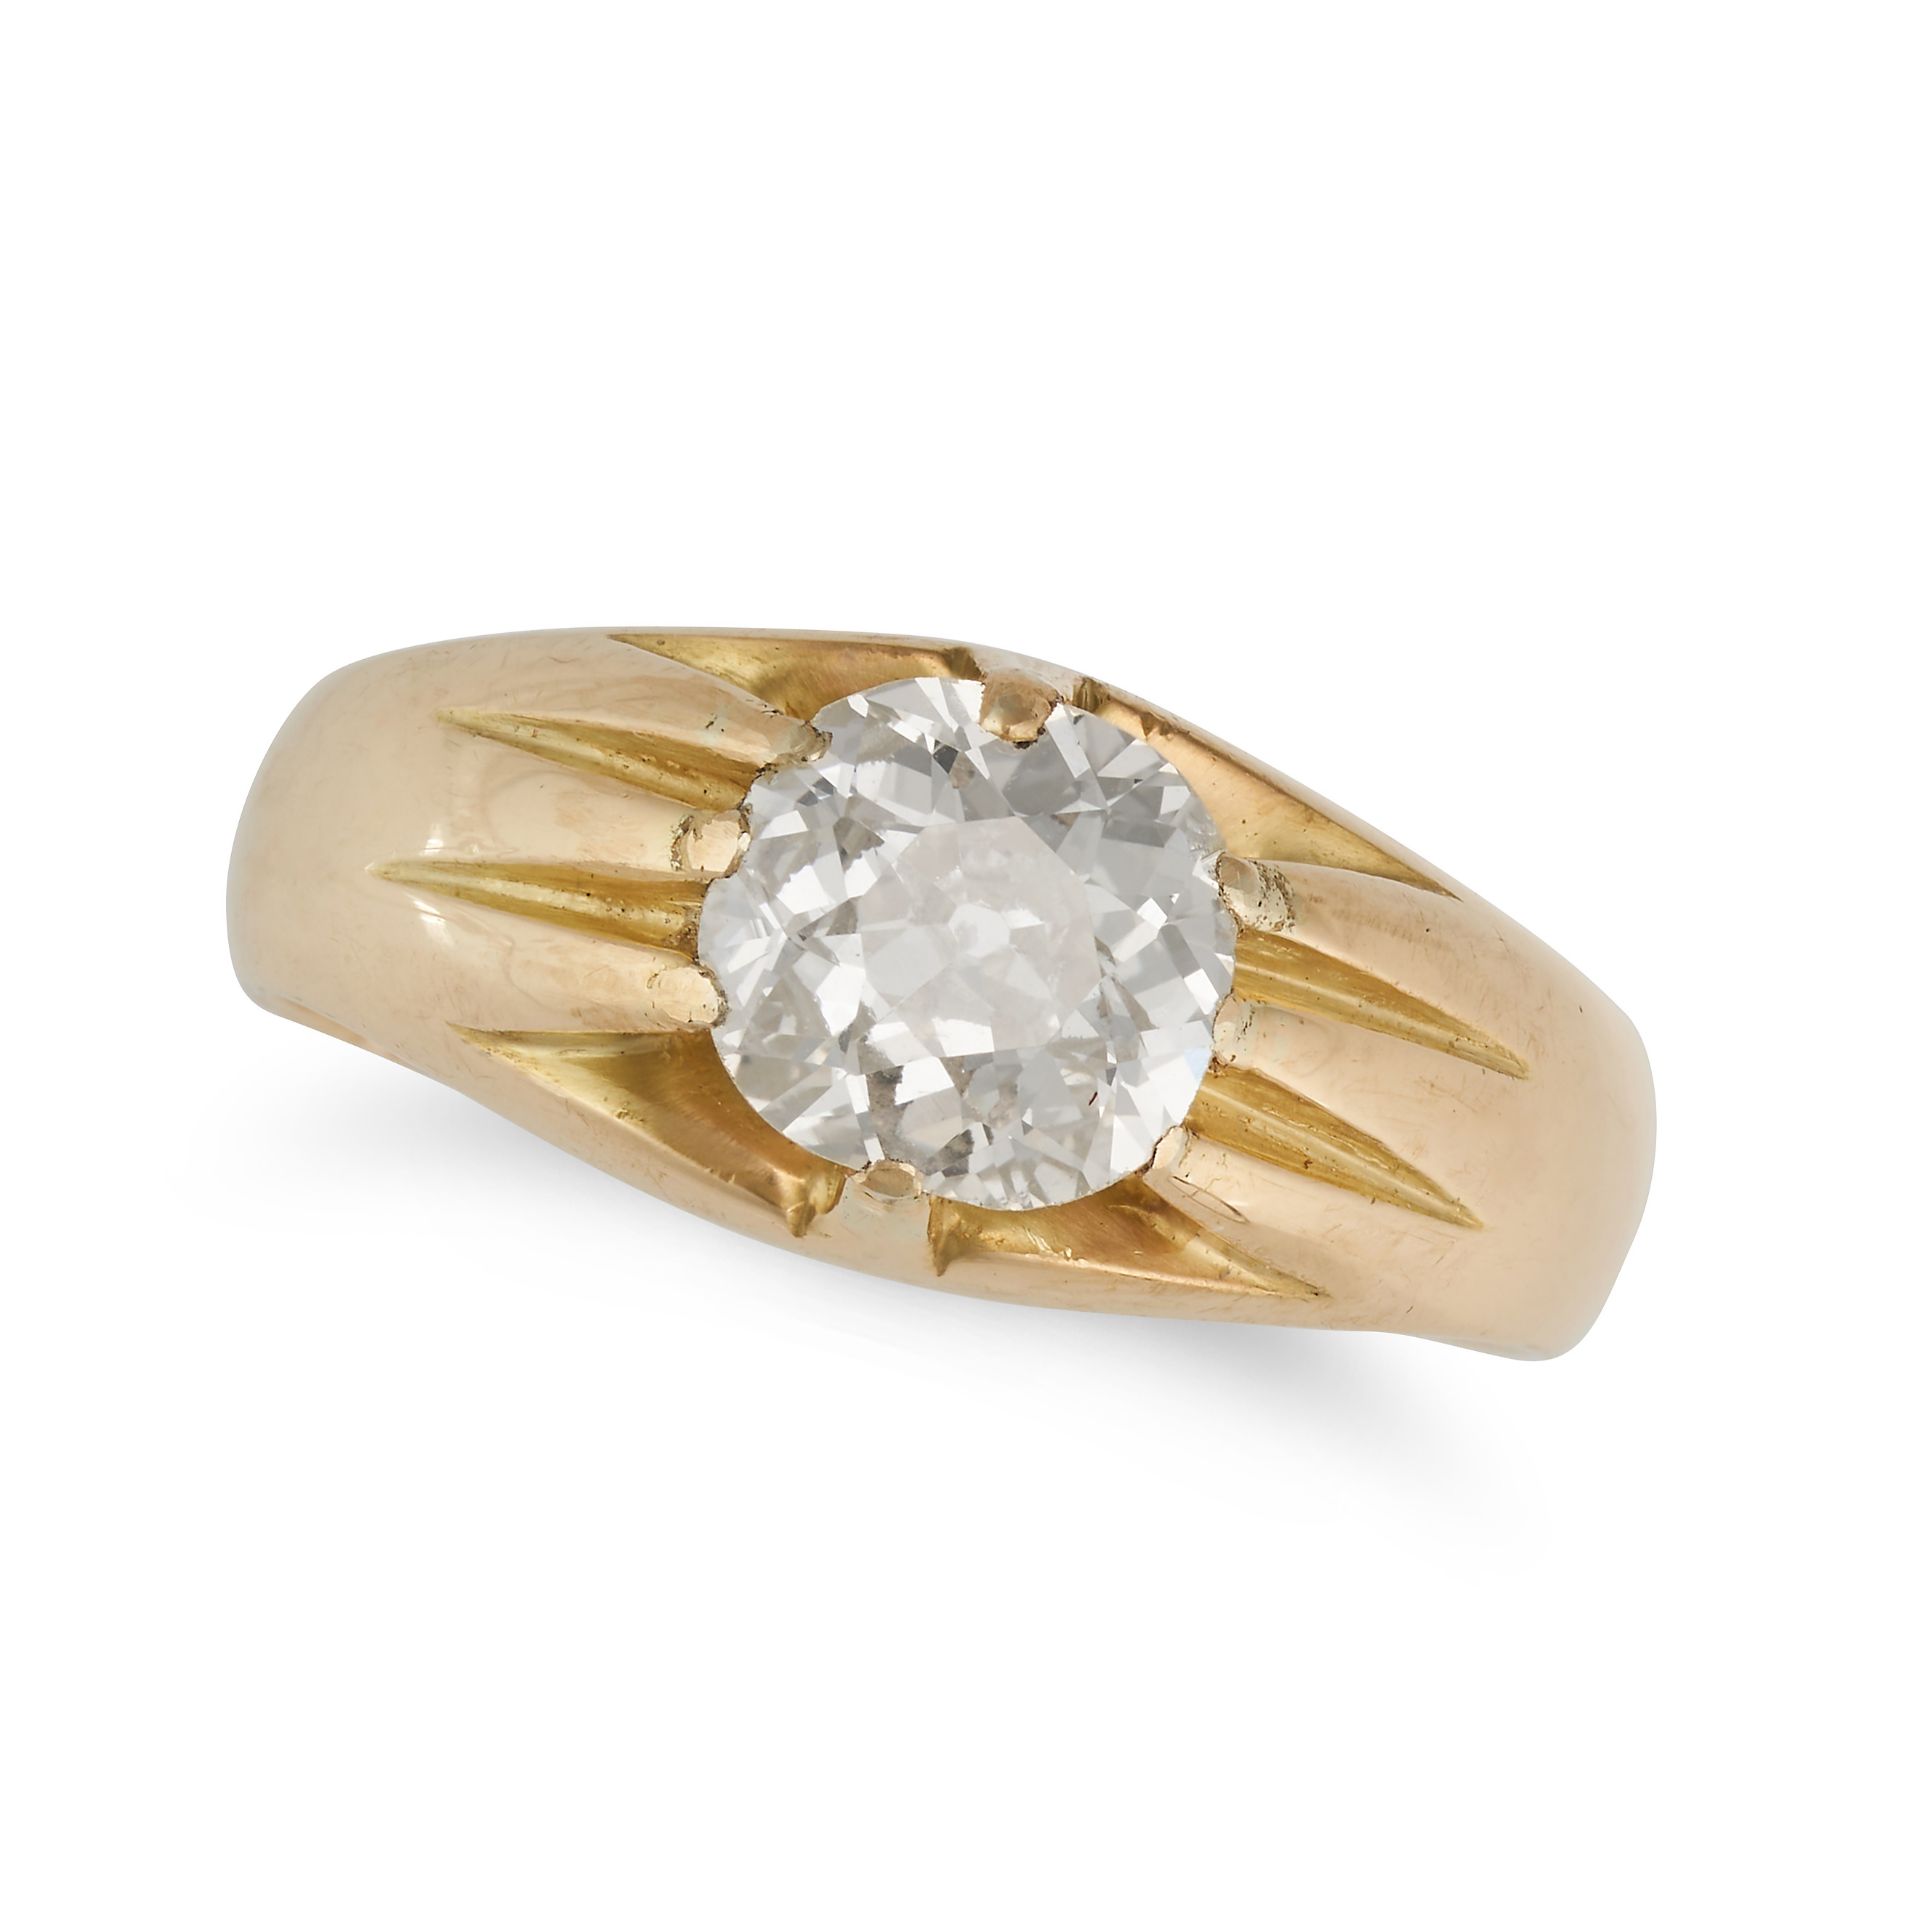 A DIAMOND GYPSY RING in 18ct yellow gold, set with an old cut diamond of approximately 1.28 carat...